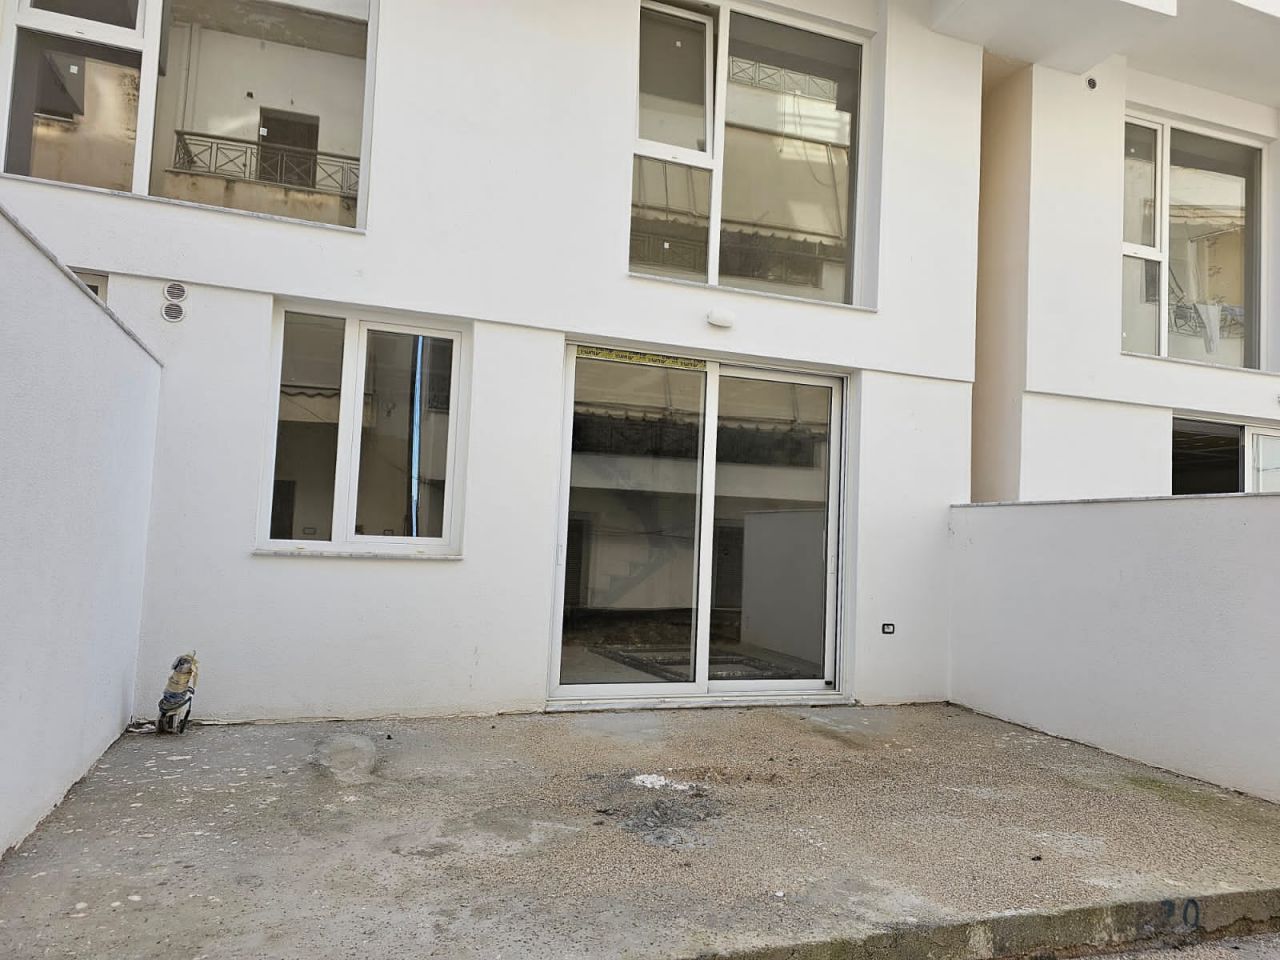 Duplex Apartment For Sale In Saranda, Located In A Good Area, With A Wonnderful Sea View 